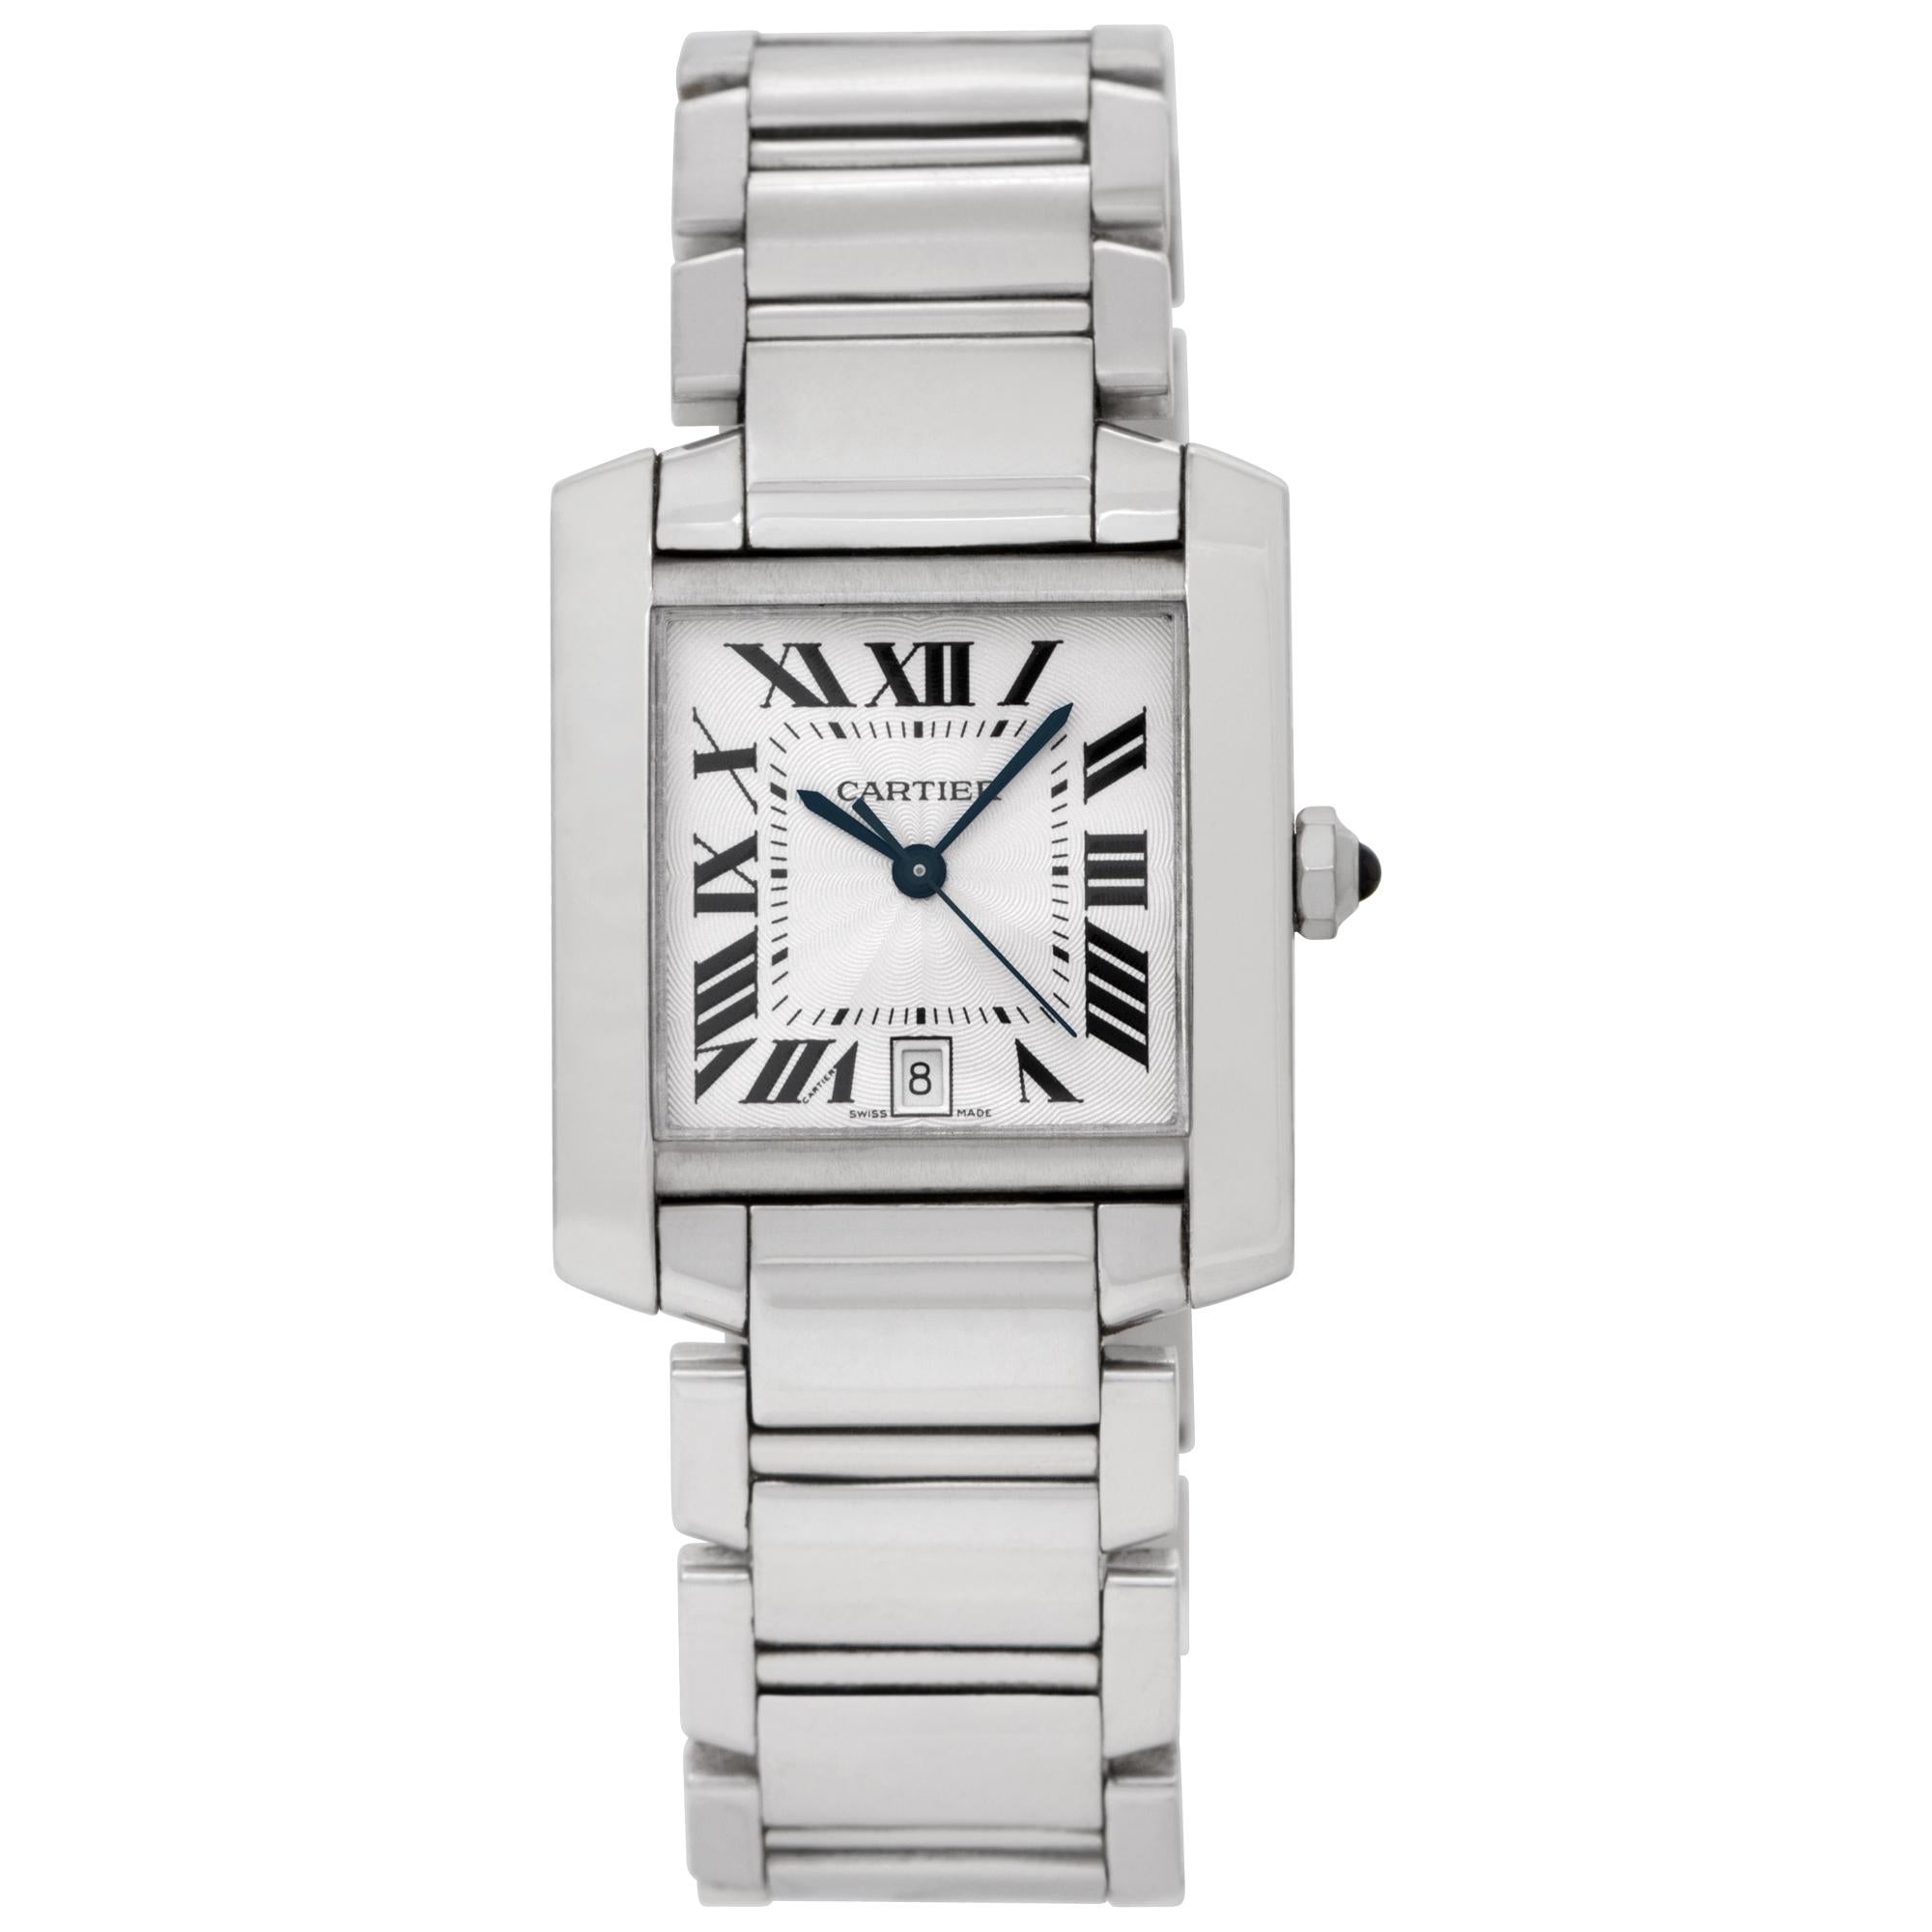 Cartier Tank Francaise W50011S3 in White Gold with a Silver Guilloche dial 28mm